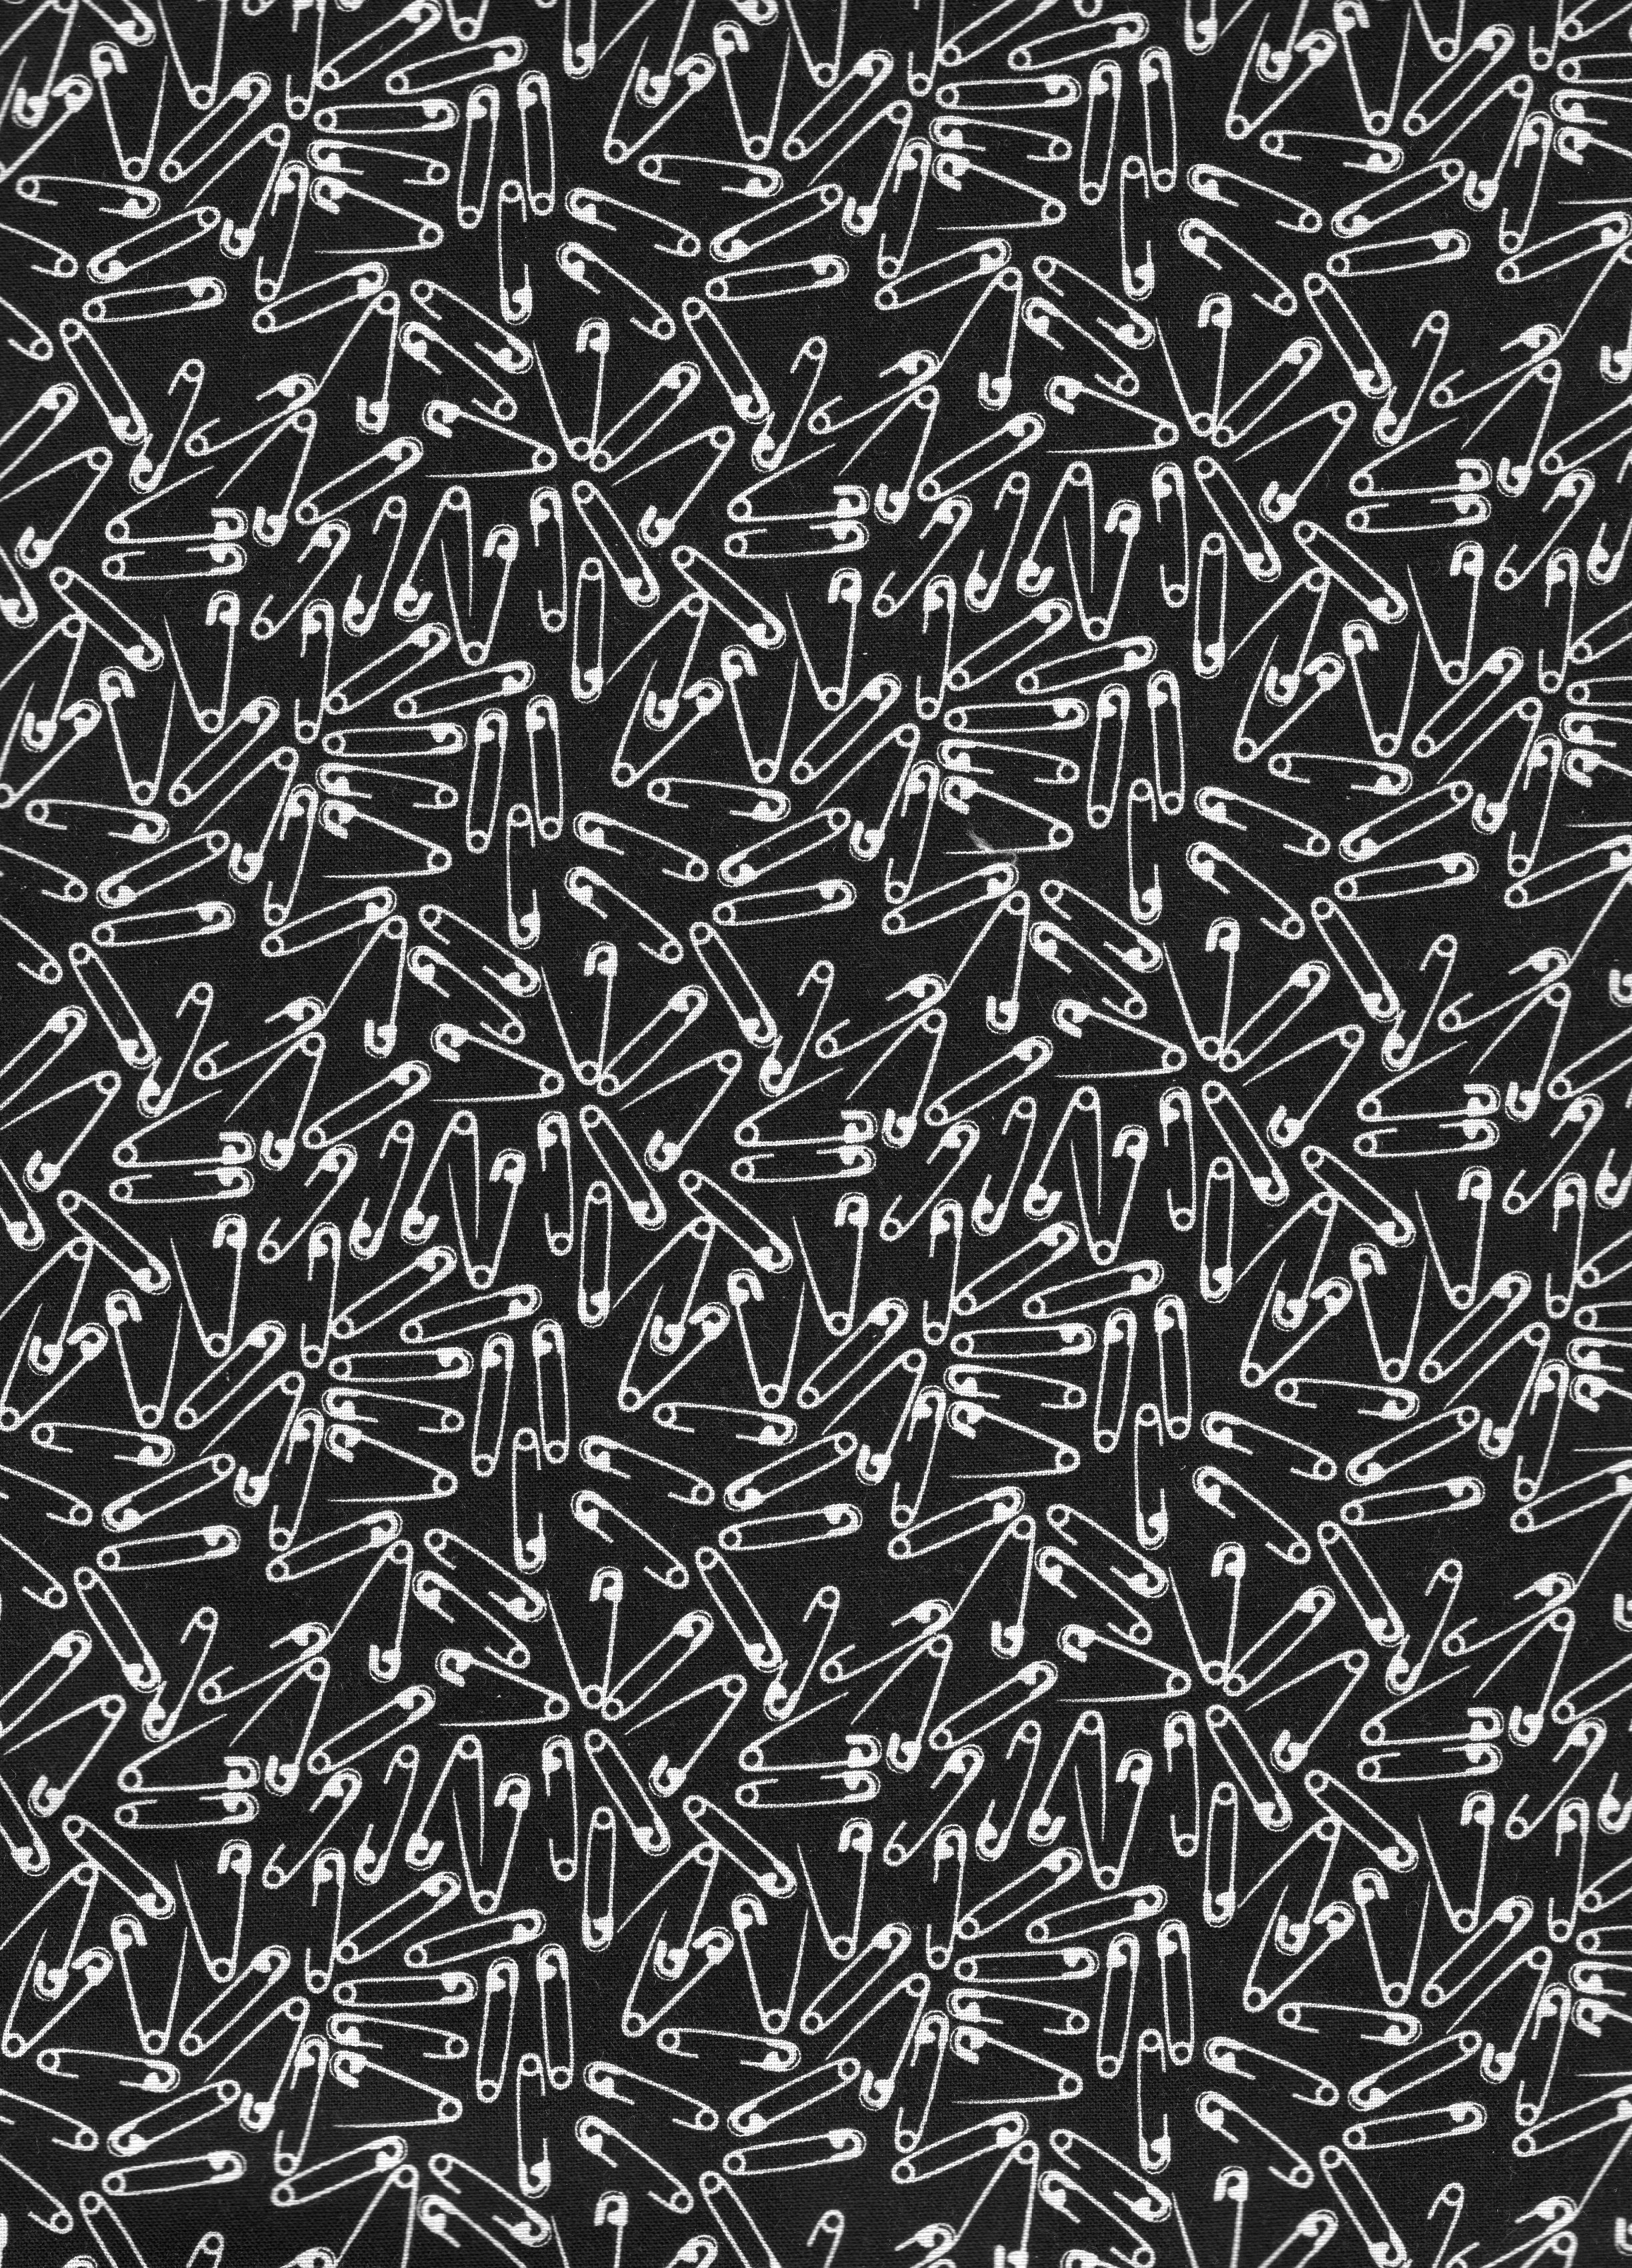 Odds And Ends White Safety Pins / Black bla429 – Quilt-a-way Fabrics